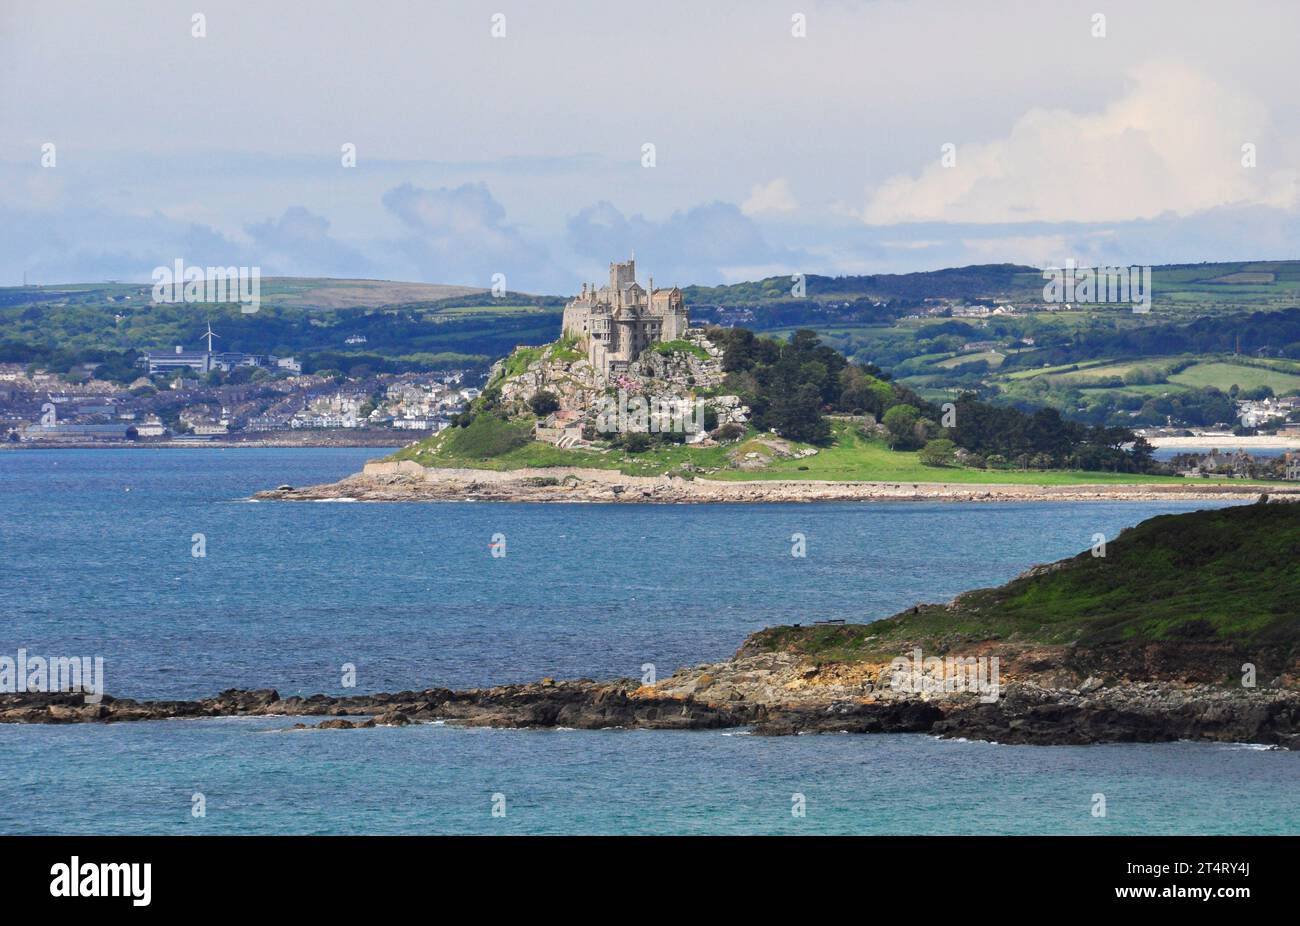 A distant view of St Michaels Mount from the South West Coast path between Perannuthnoe and Marazion as the path follows the winding coastline. Stock Photo